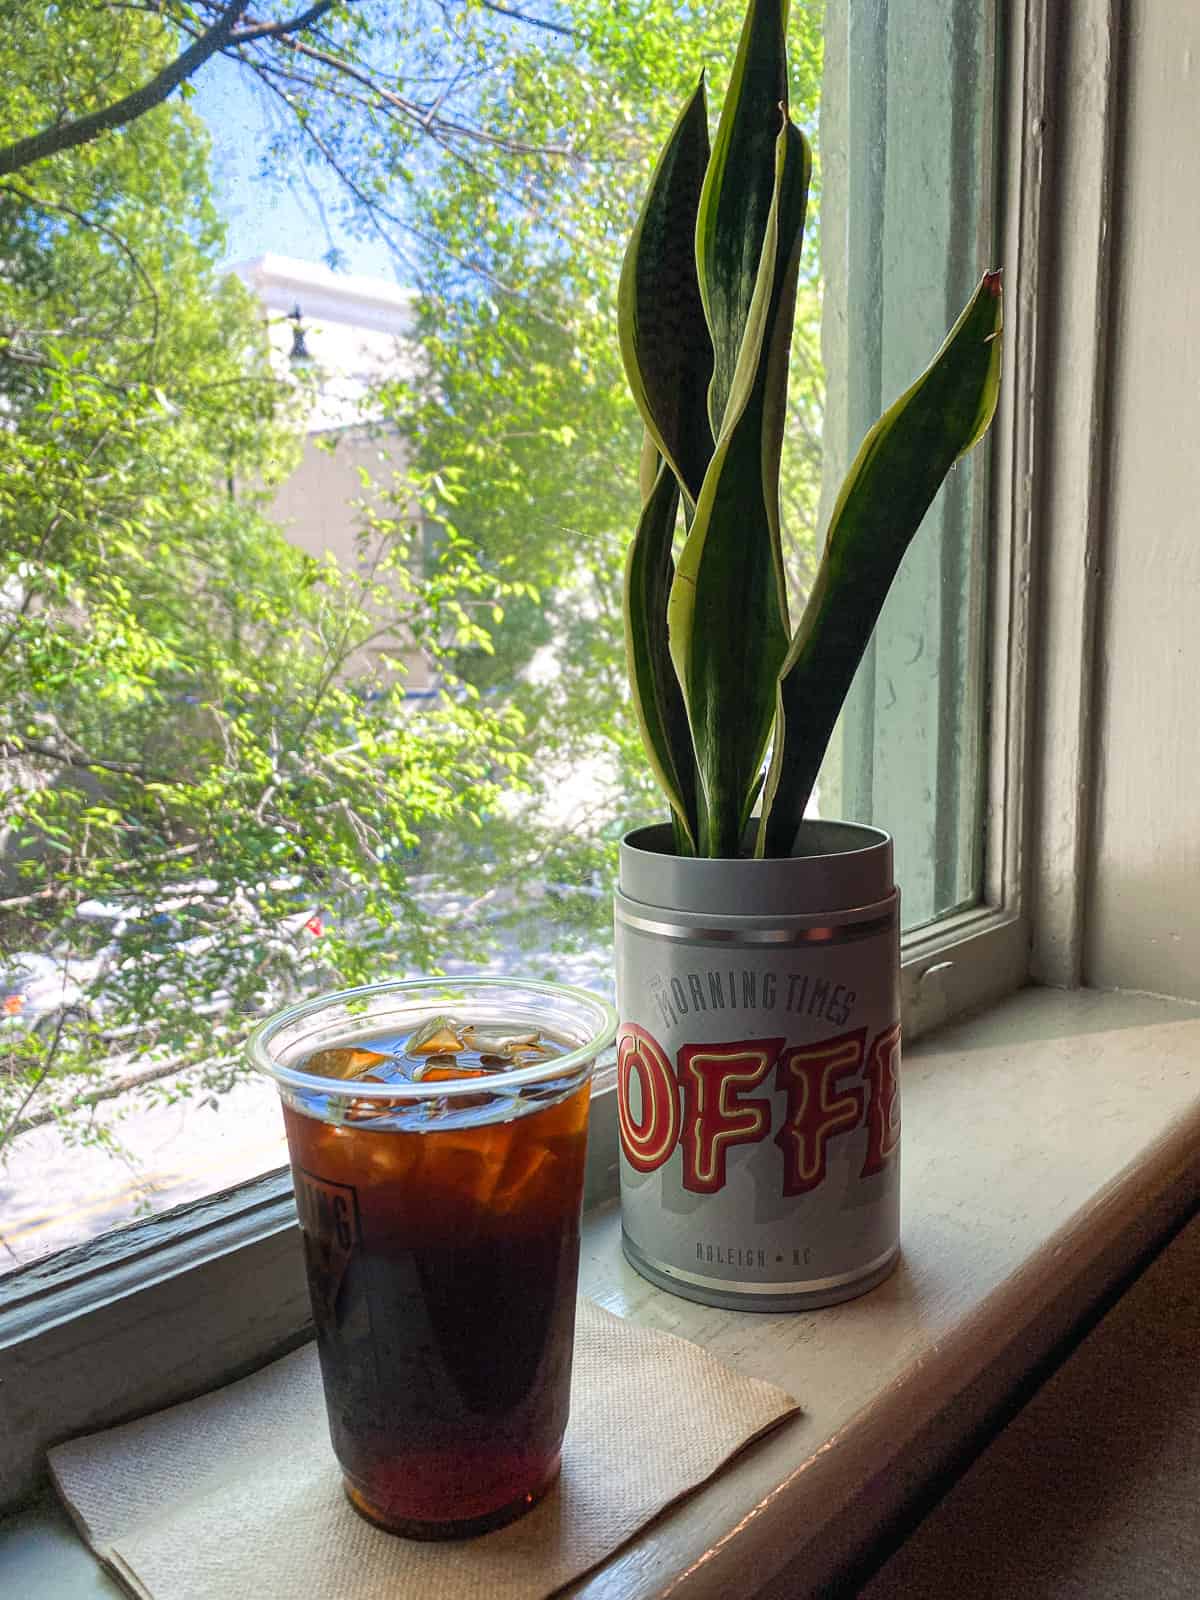 An iced coffee on a windowsill next to a plant that says morning times on the vase